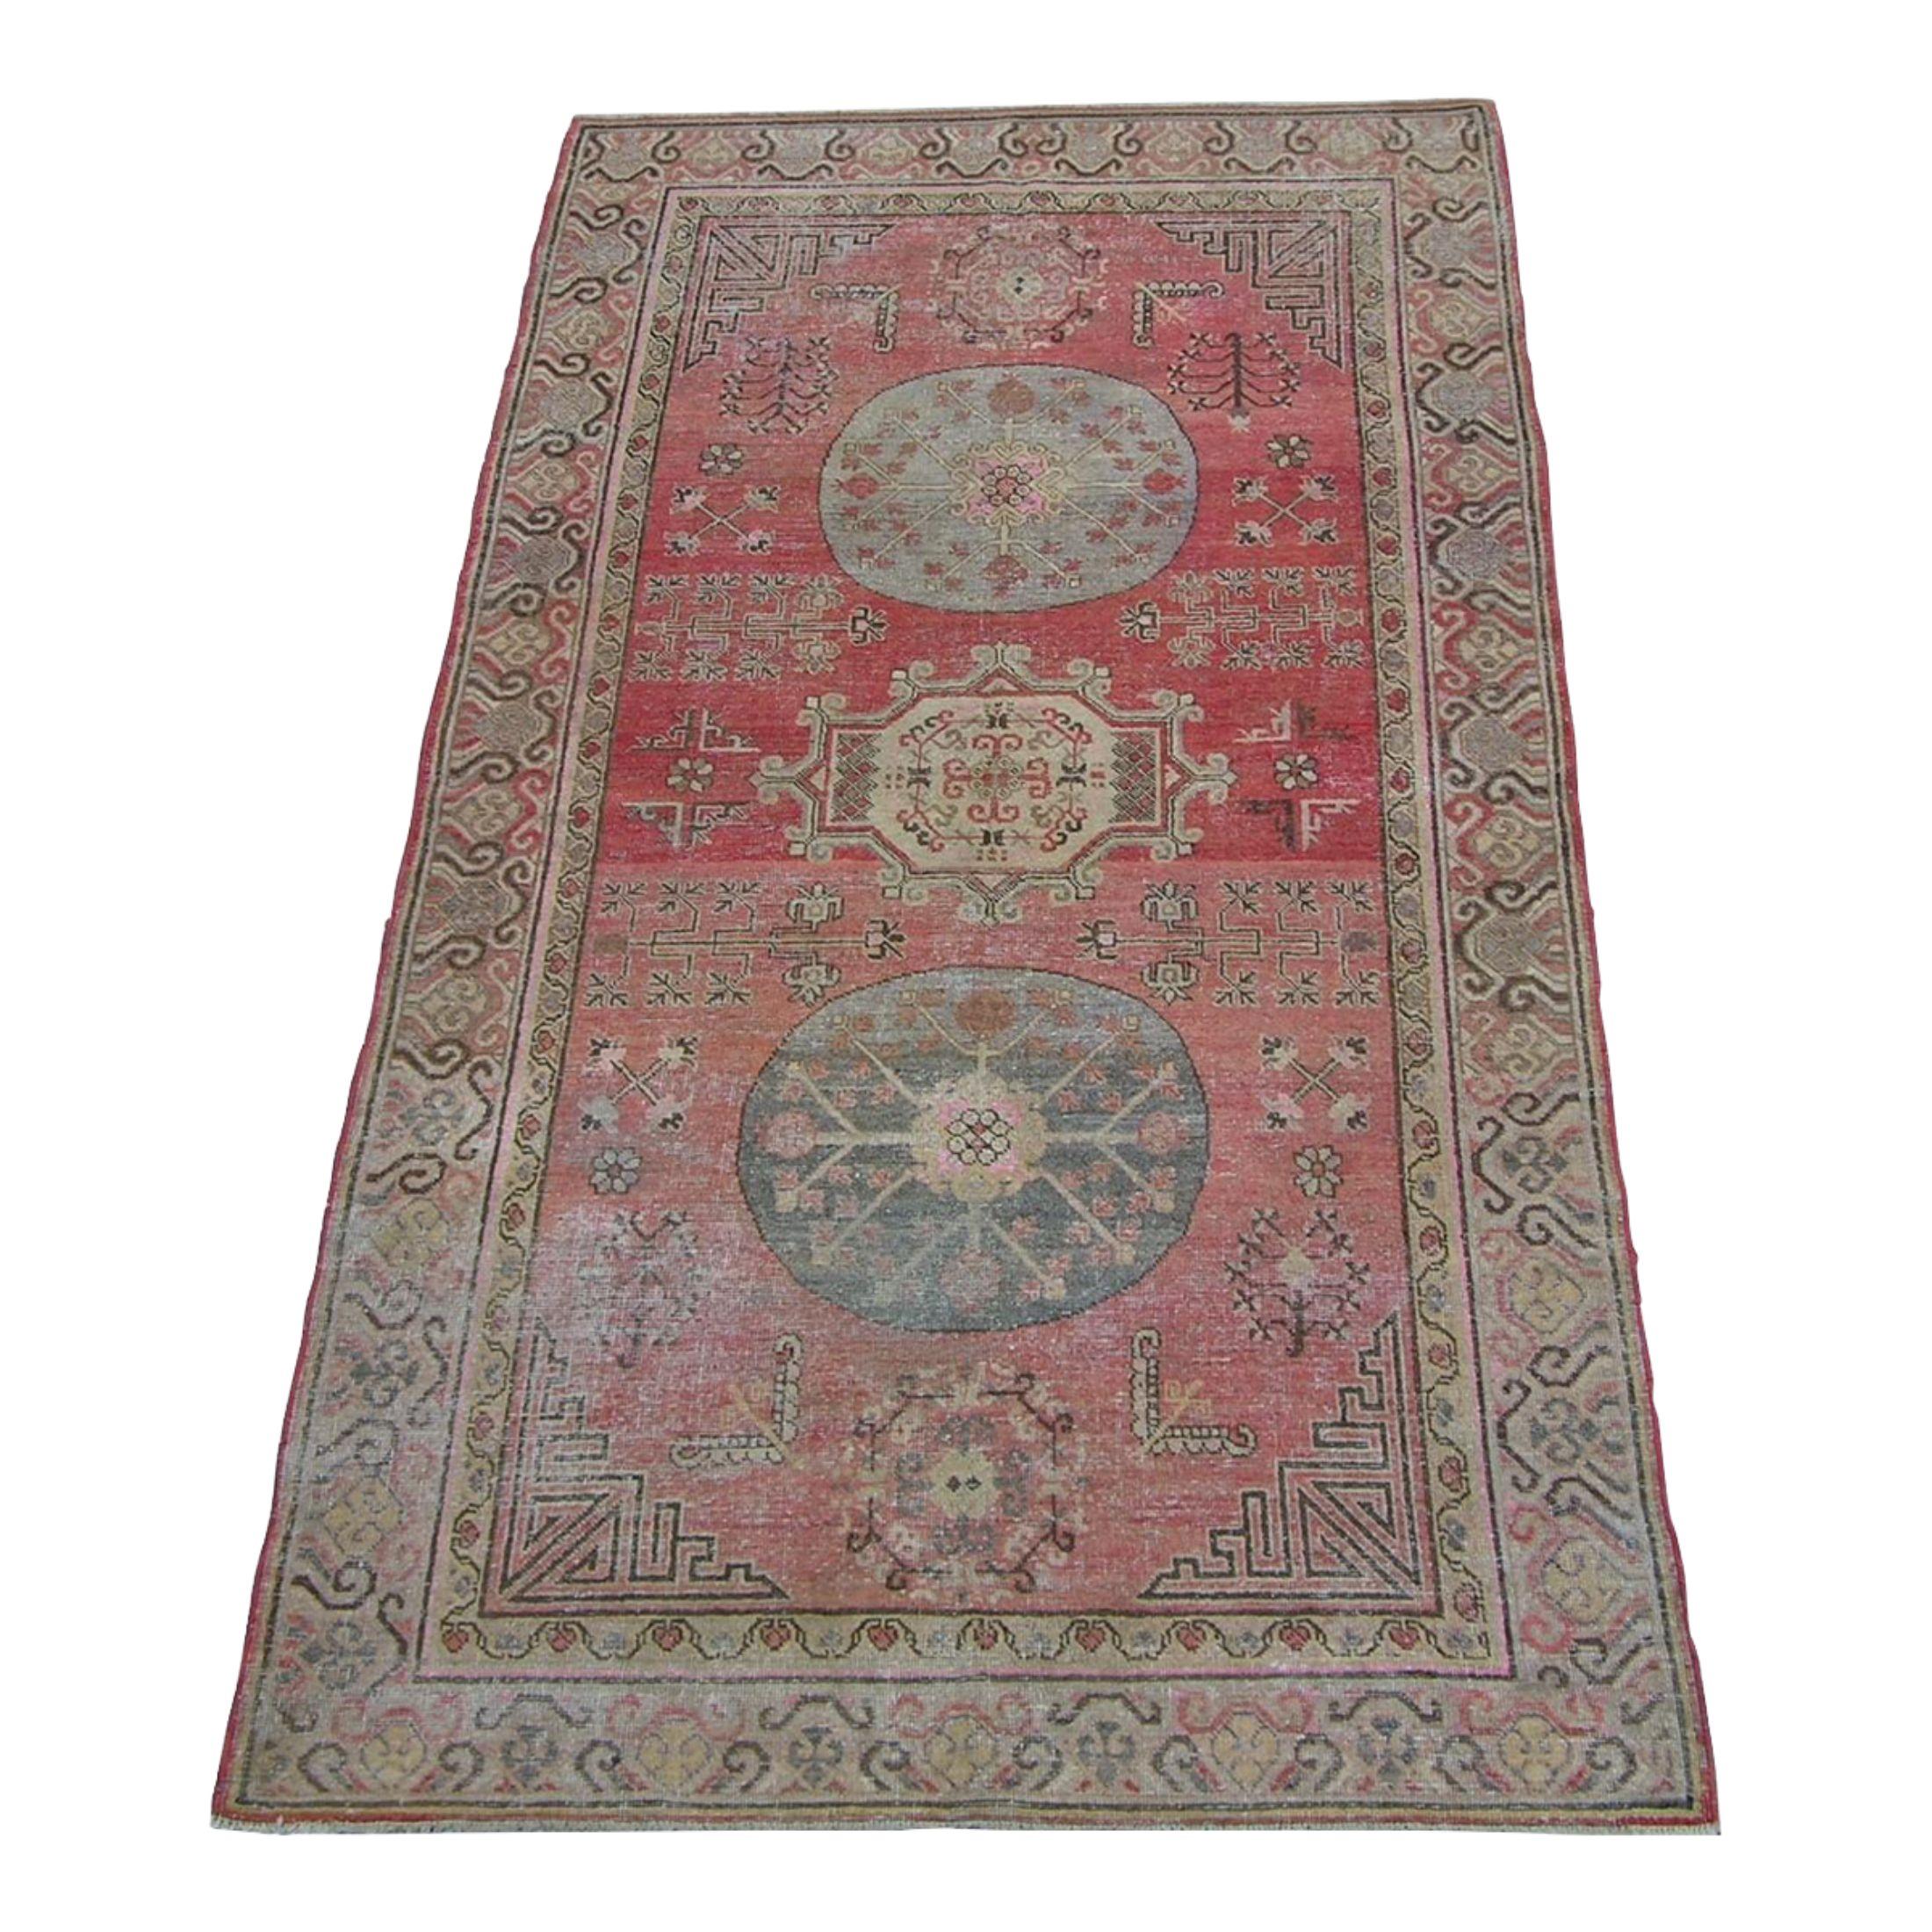 Central Asian 19th Century Samarkand For Sale